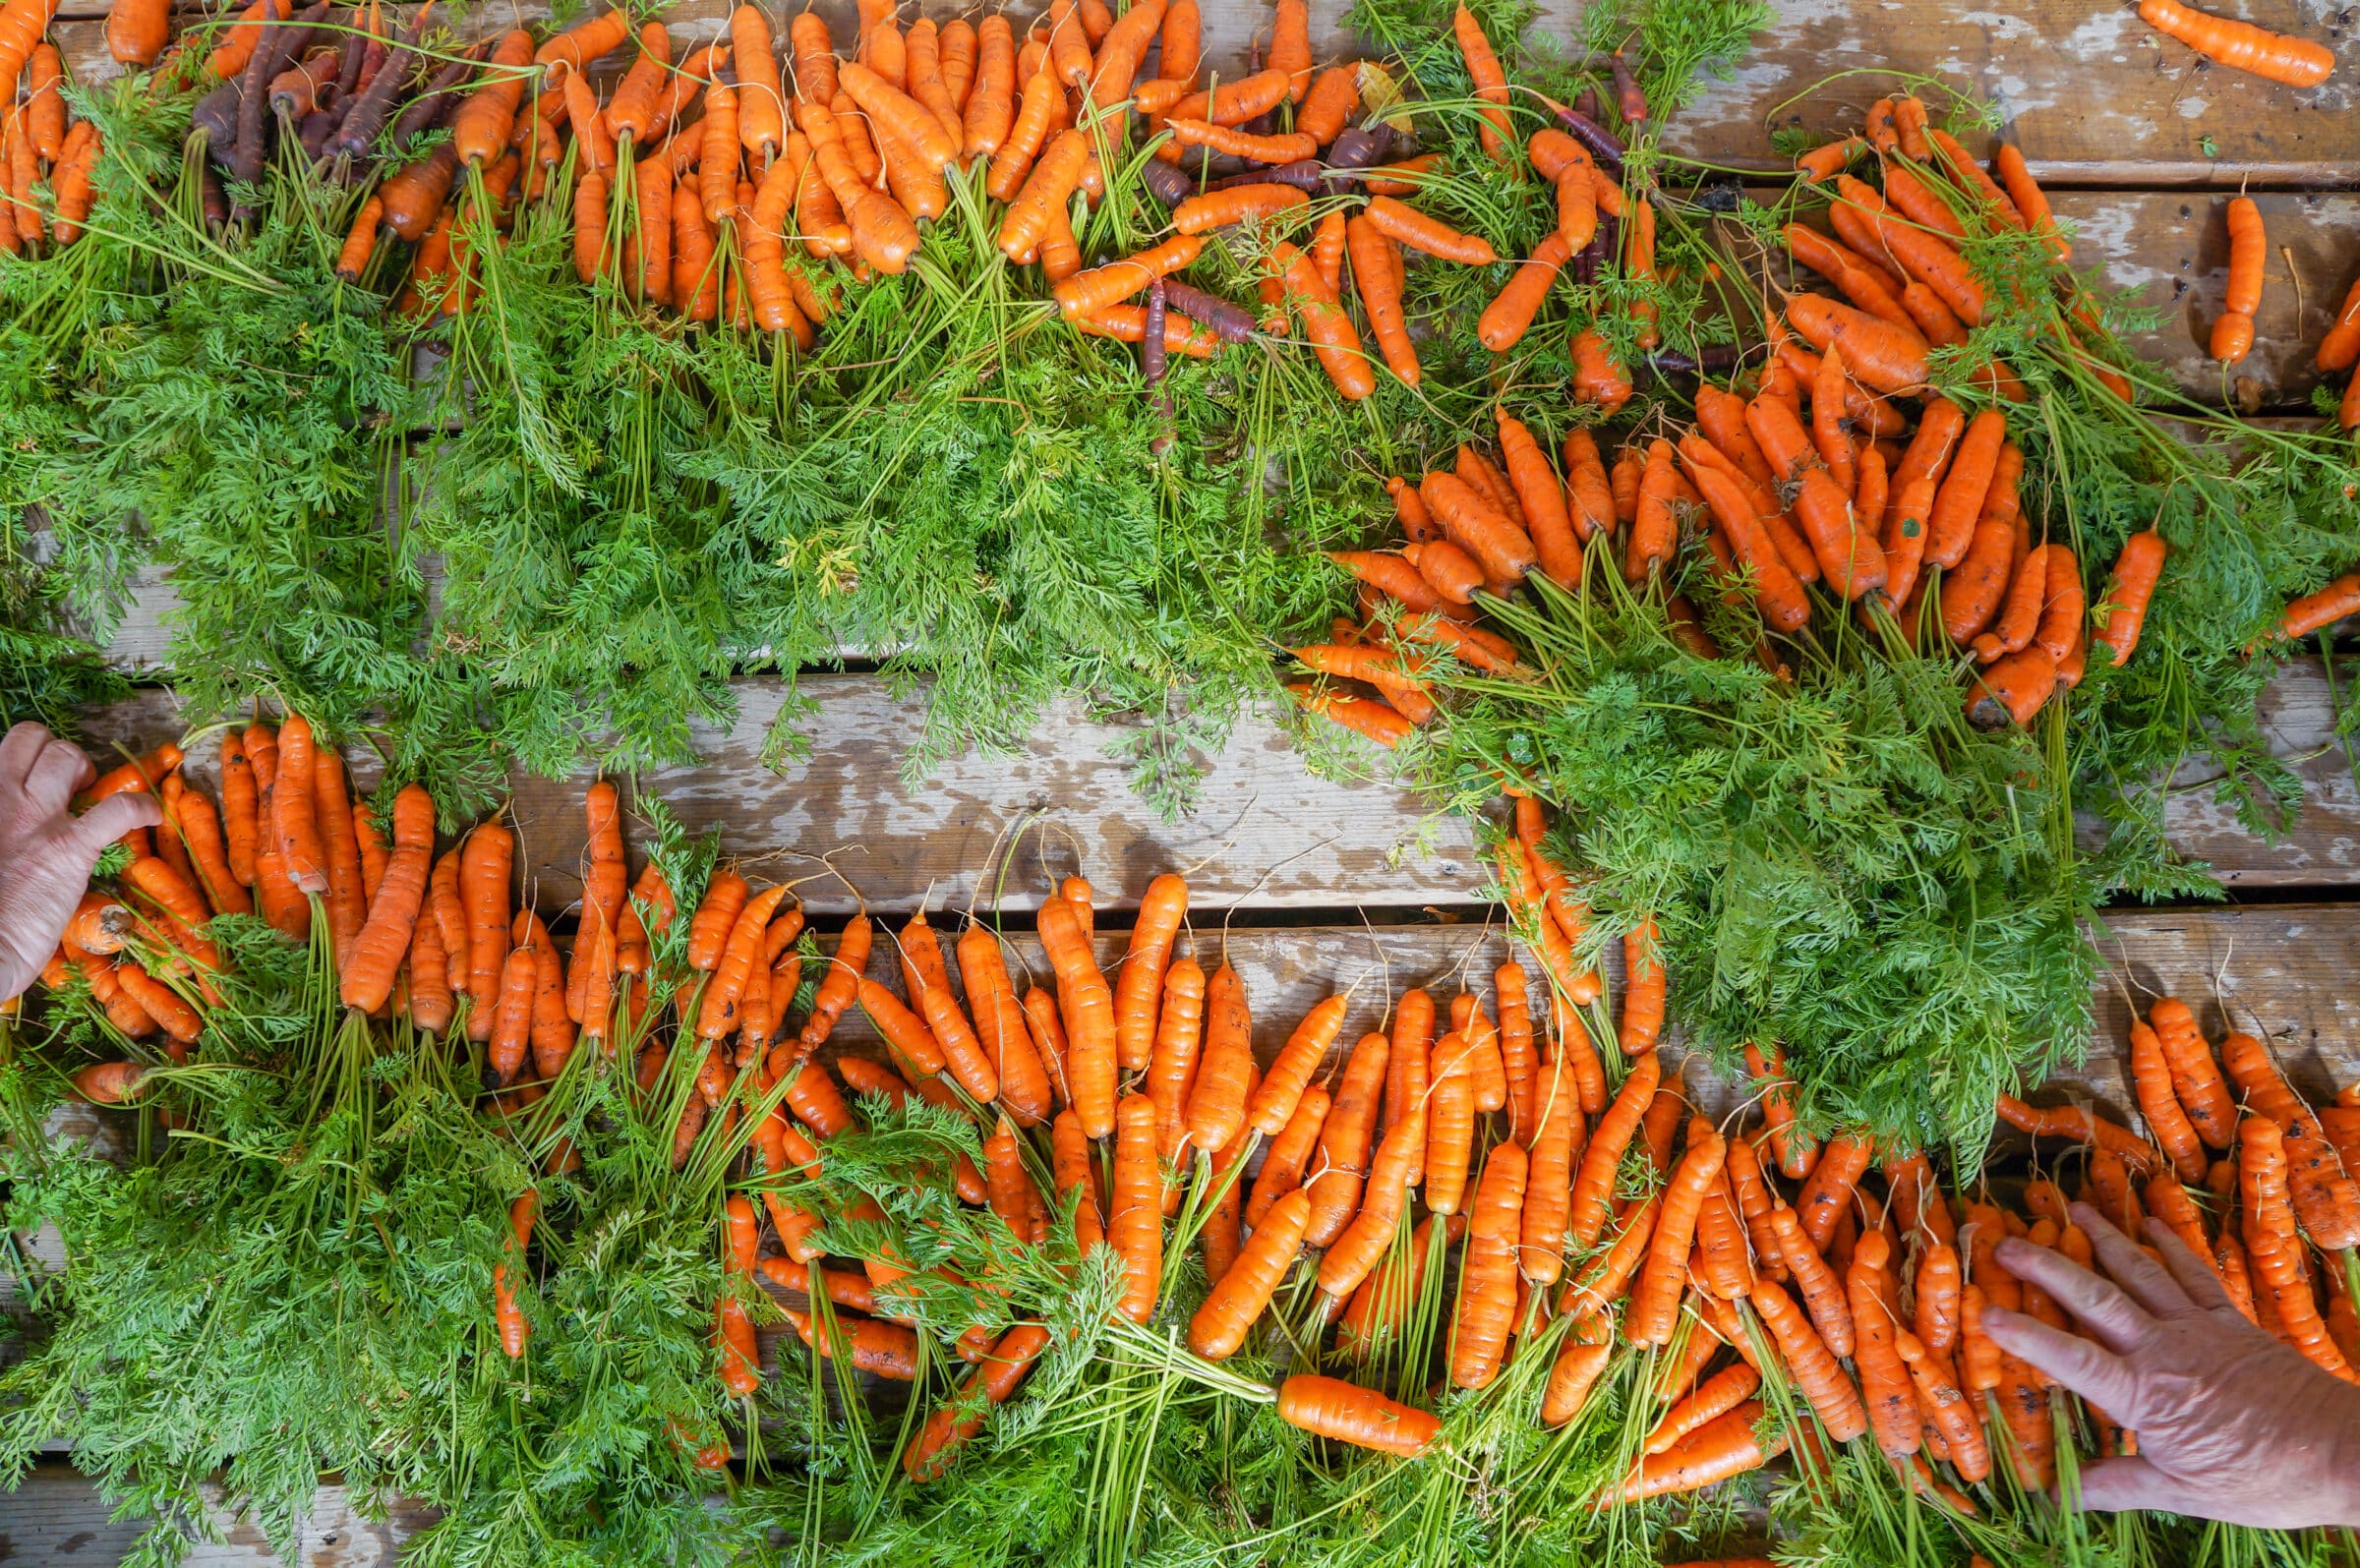 Piles of large carrots spread across wooden table with hands reaching in on either side.